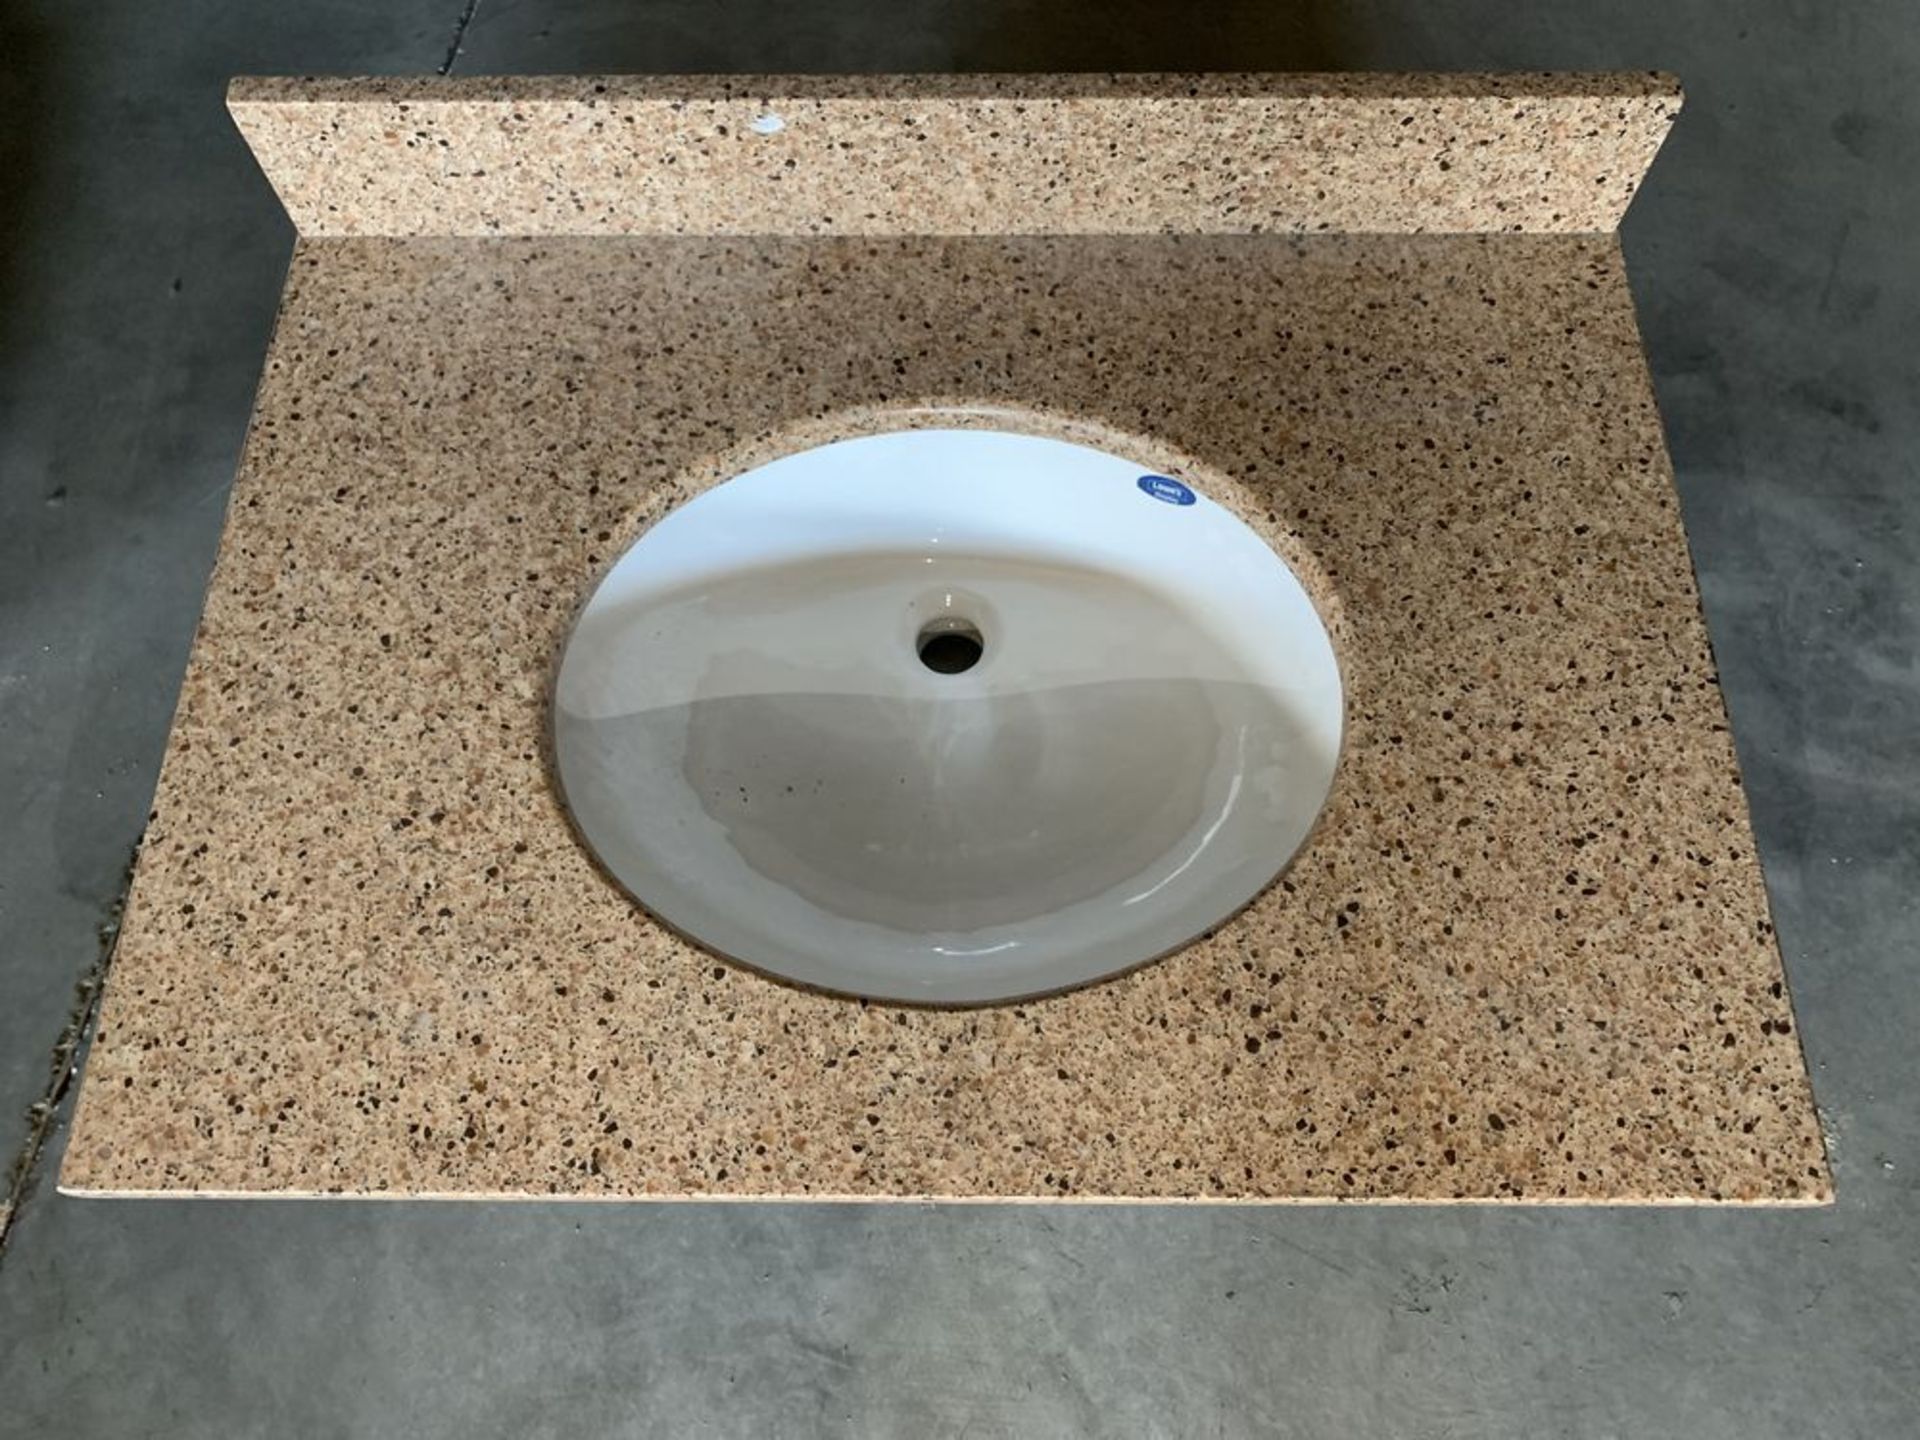 Lowes Quartz Stone Countertop and Sink, Install Ready, 32"x24" - Sand